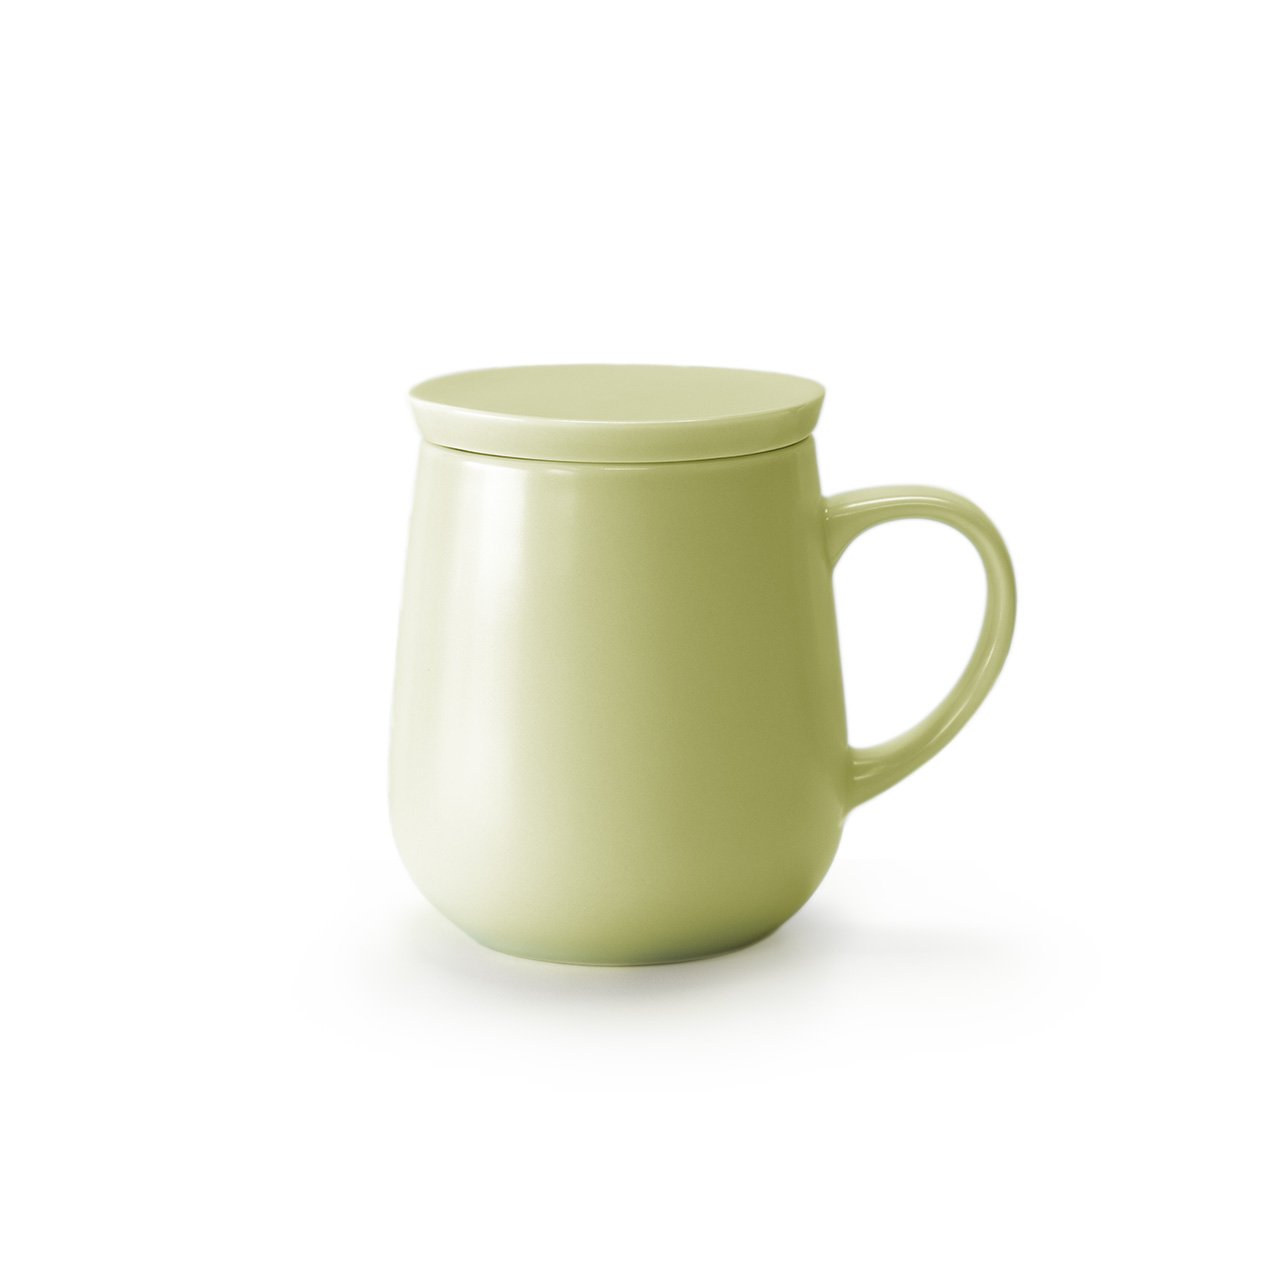 Small olive colored mug with lid